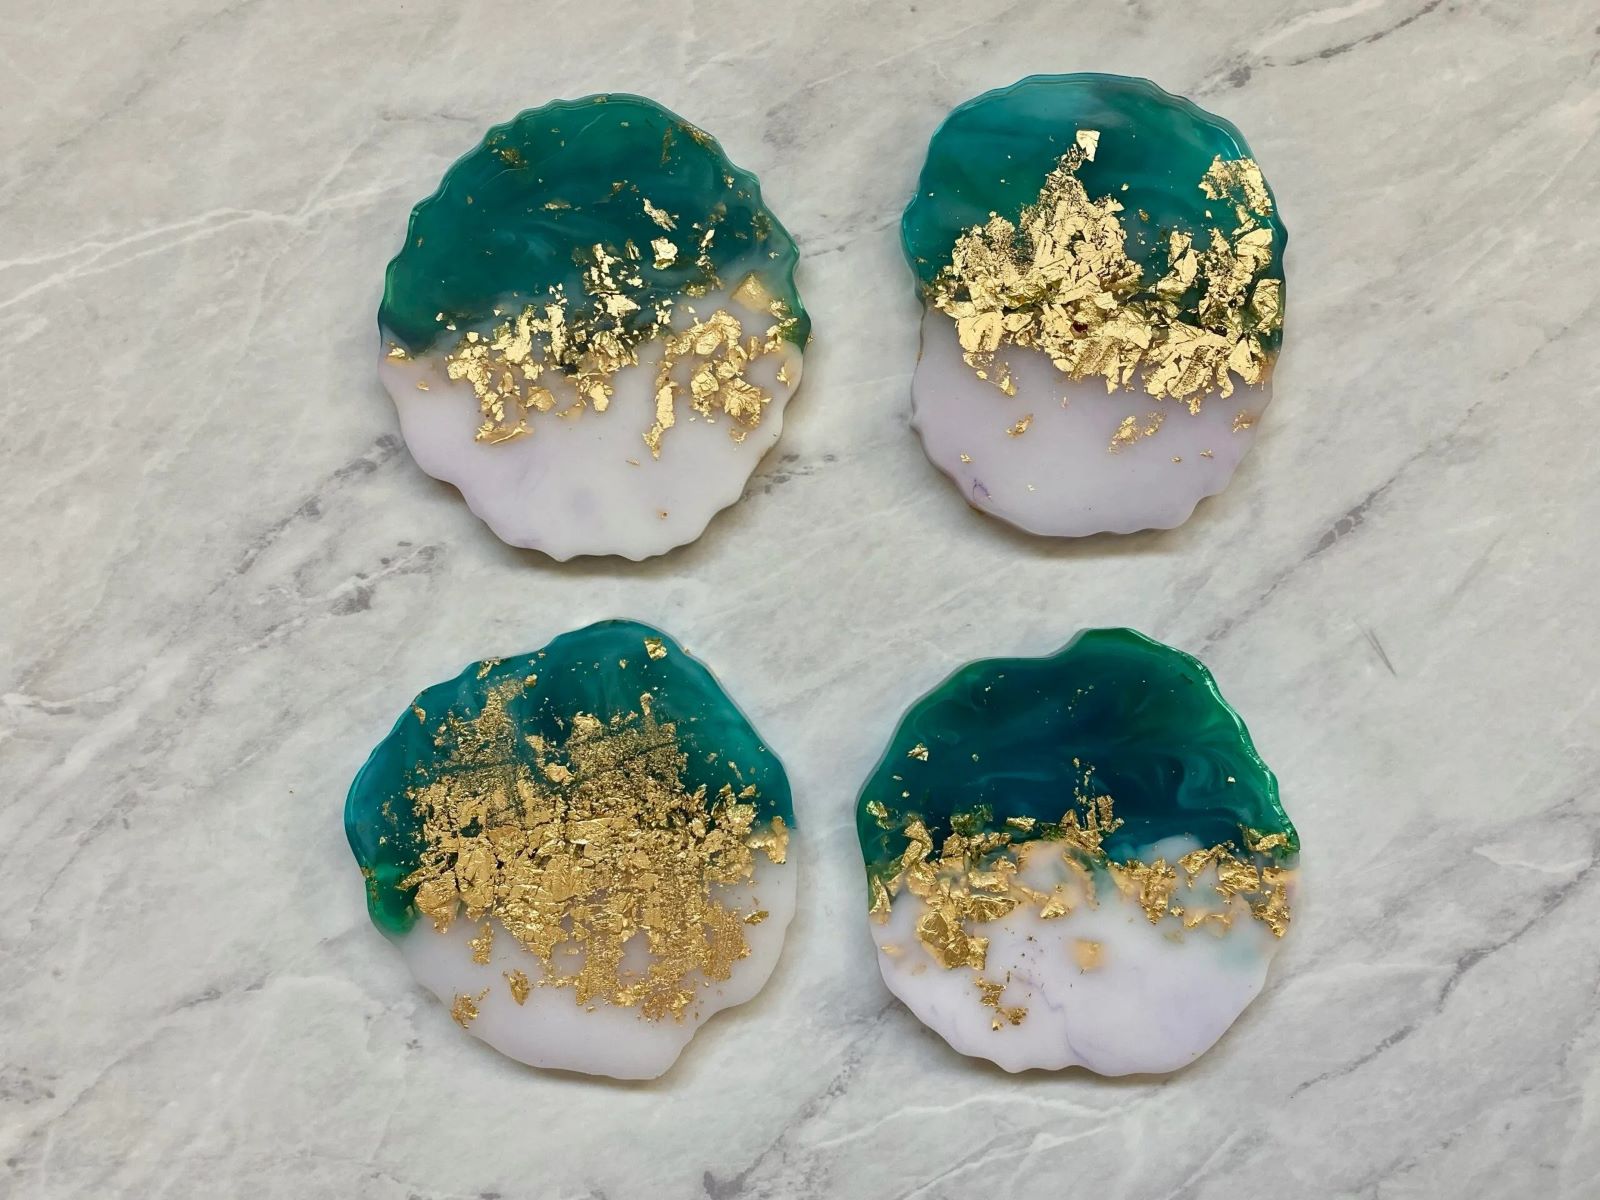 How To Resin Coasters